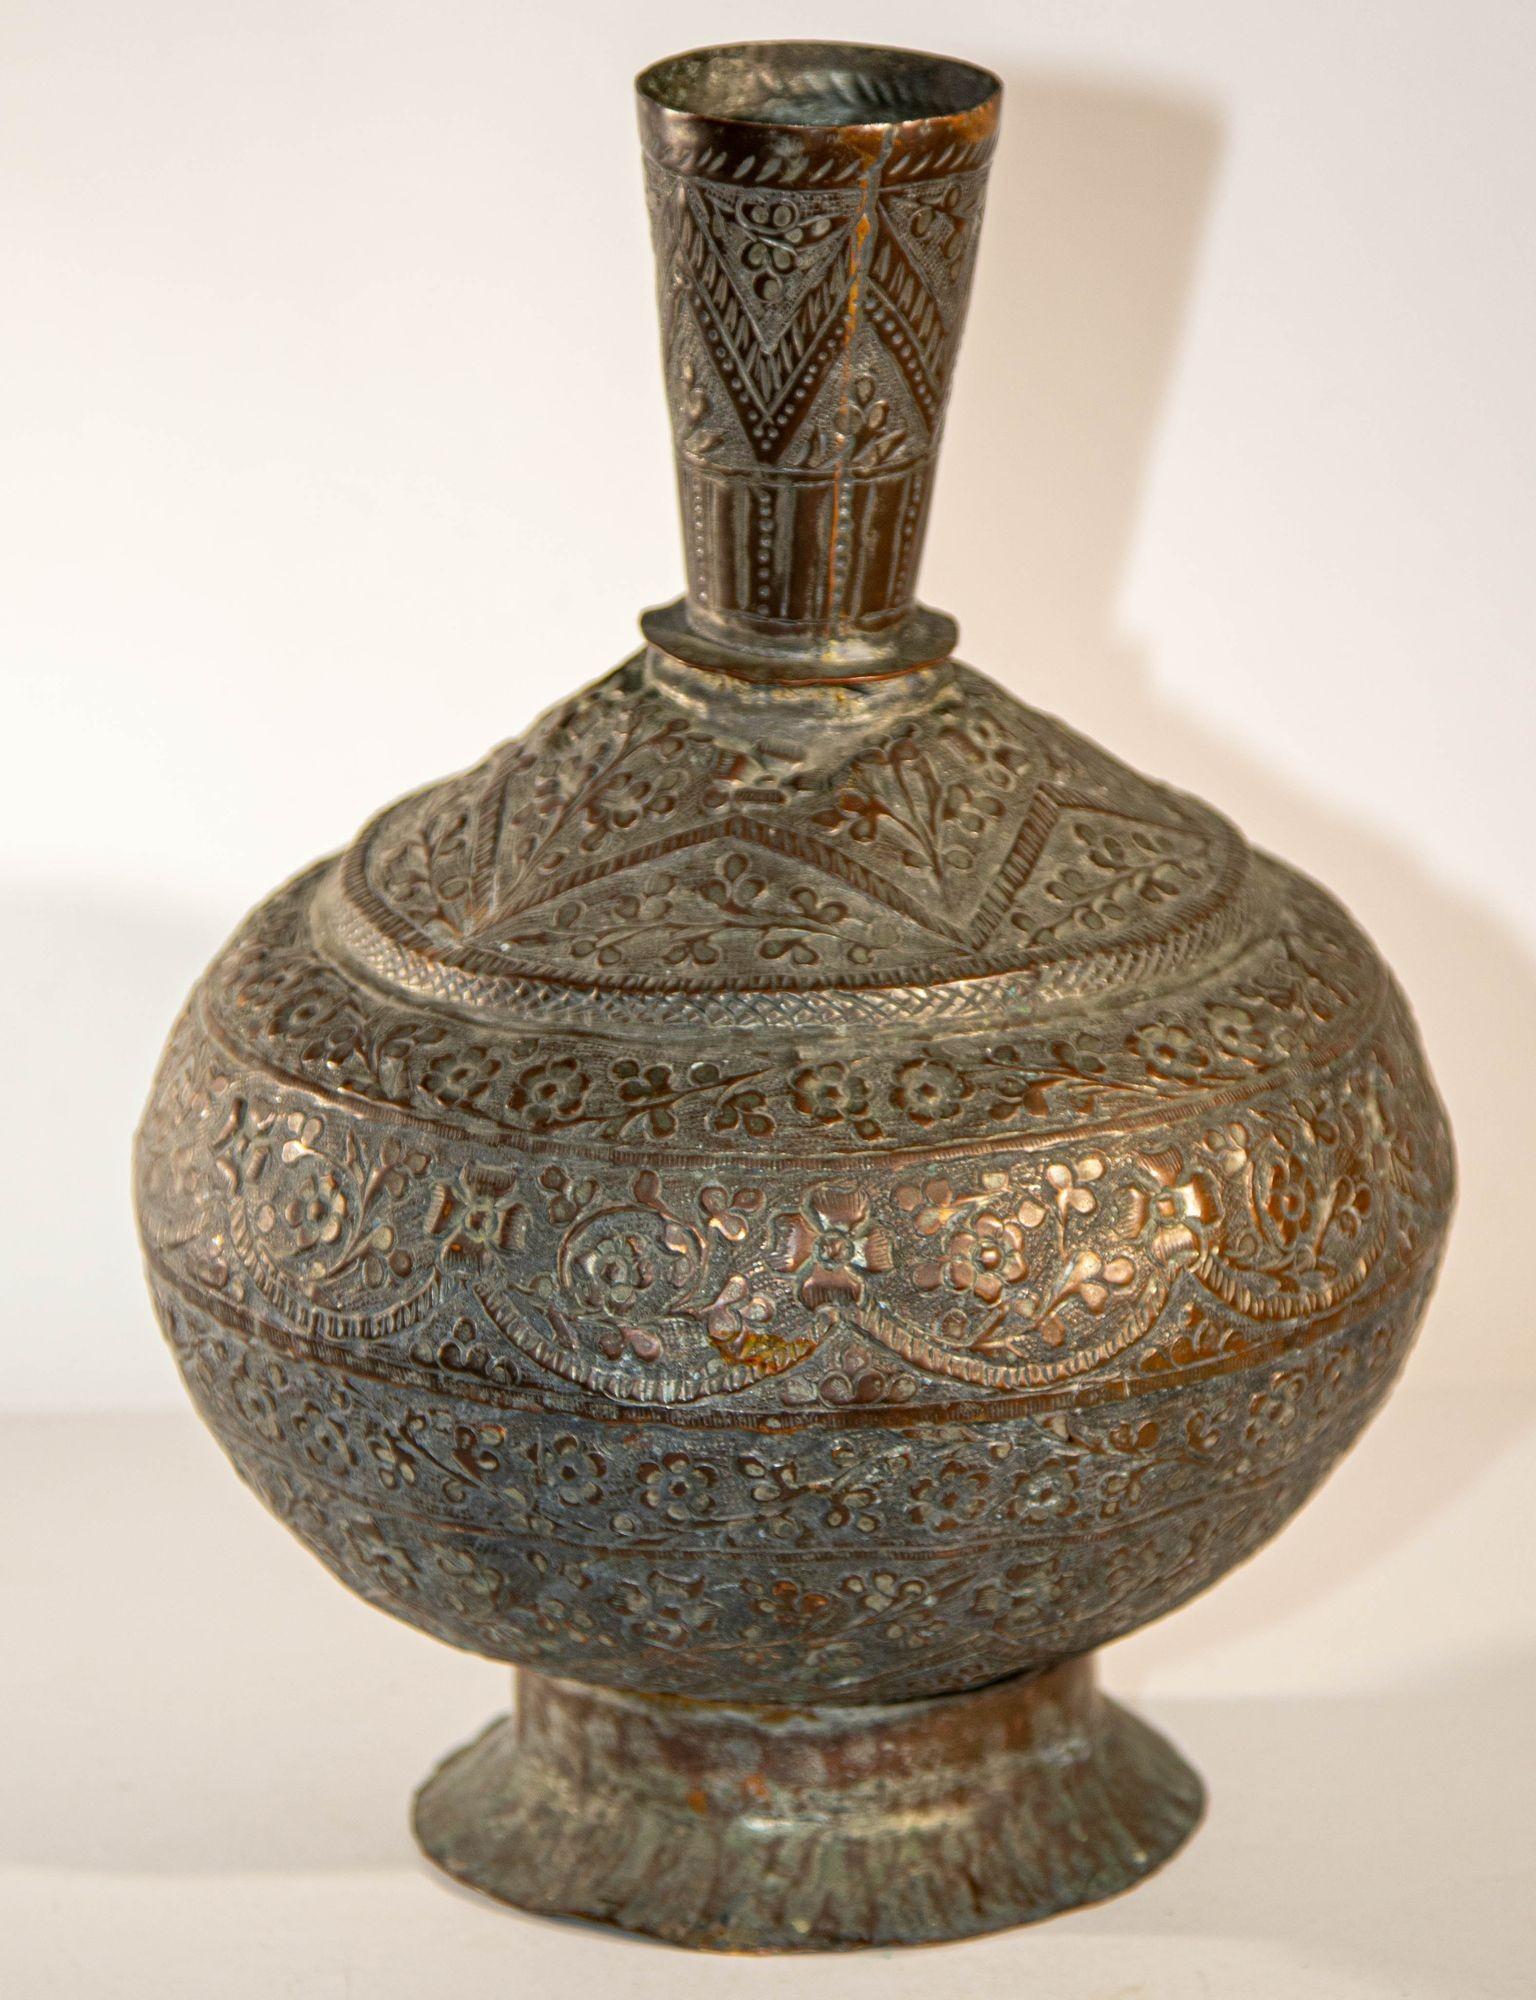 Antique Islamic metal copper hookah bottle base of spherical form and decorated with a recessed repeated floral motif.
19th century Bronze tinned copper Indo-Persian Islamic vase, hand- chased and embossed metal with a very dark patina.
Antique